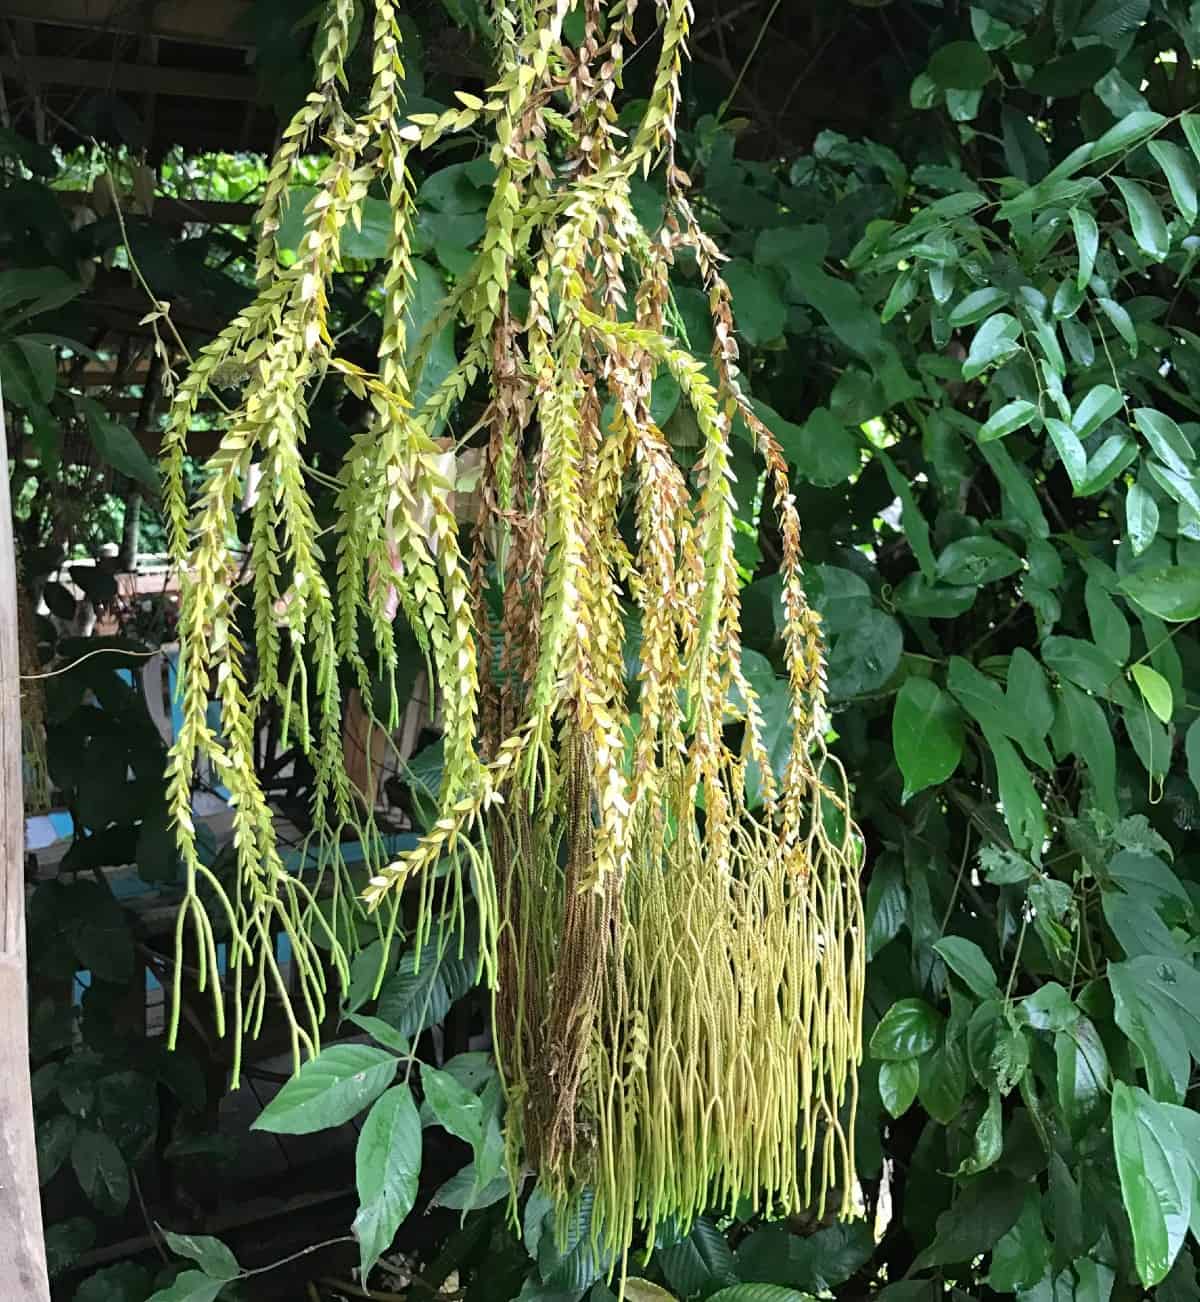 The tassel fern is an unusual evergreen specimen particularly suited for a hanging basket.